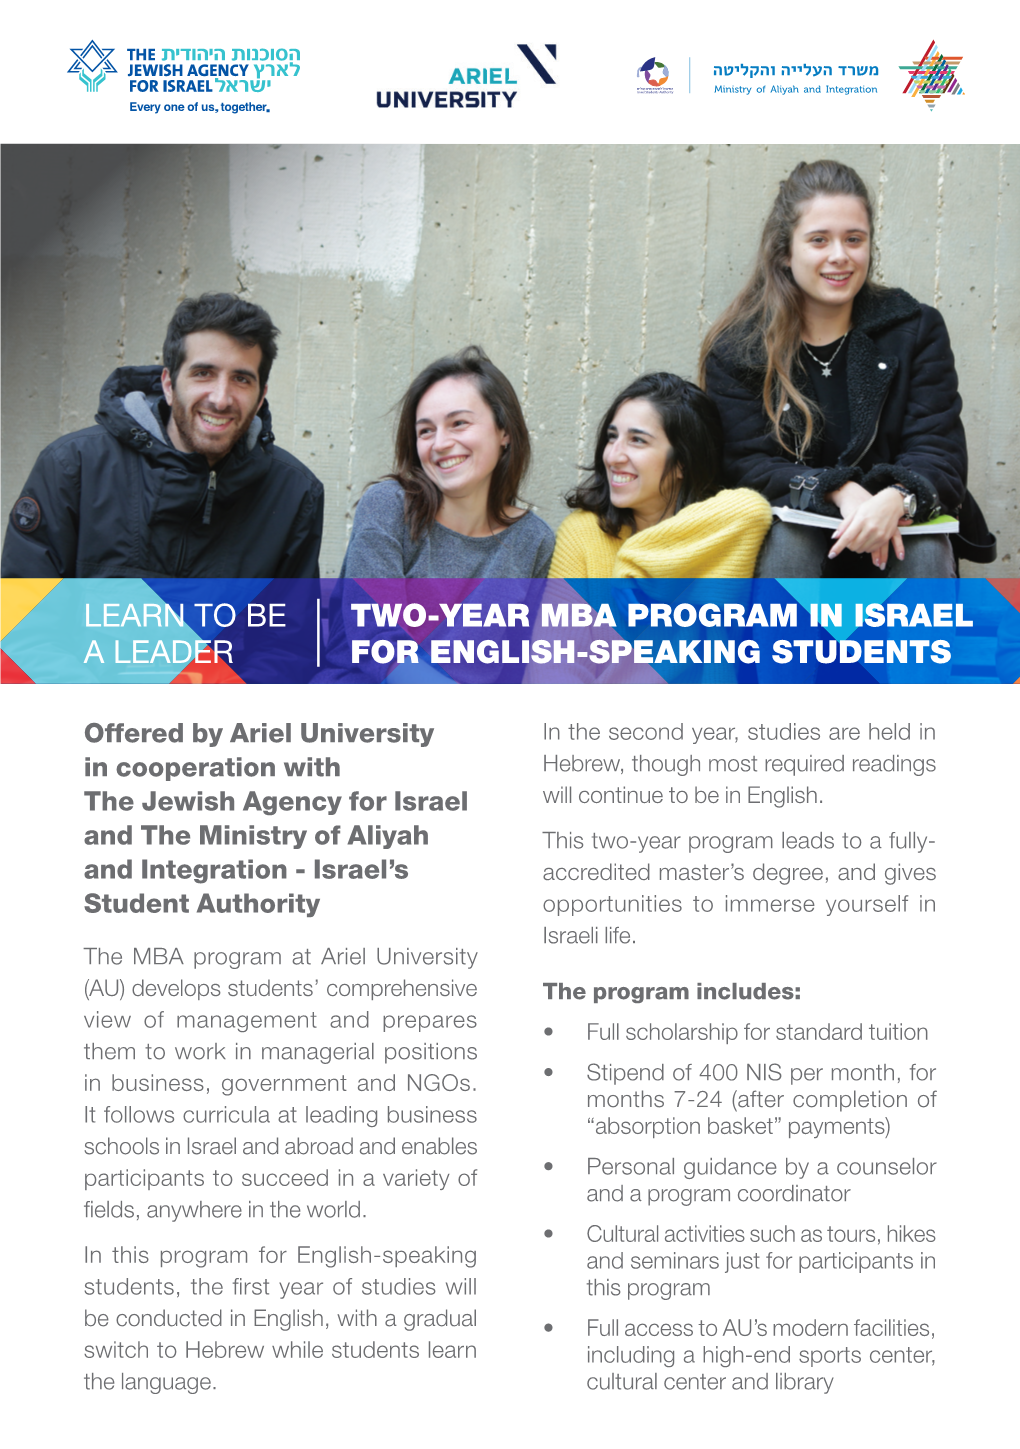 Two-Year Mba Program in Israel for English-Speaking Students